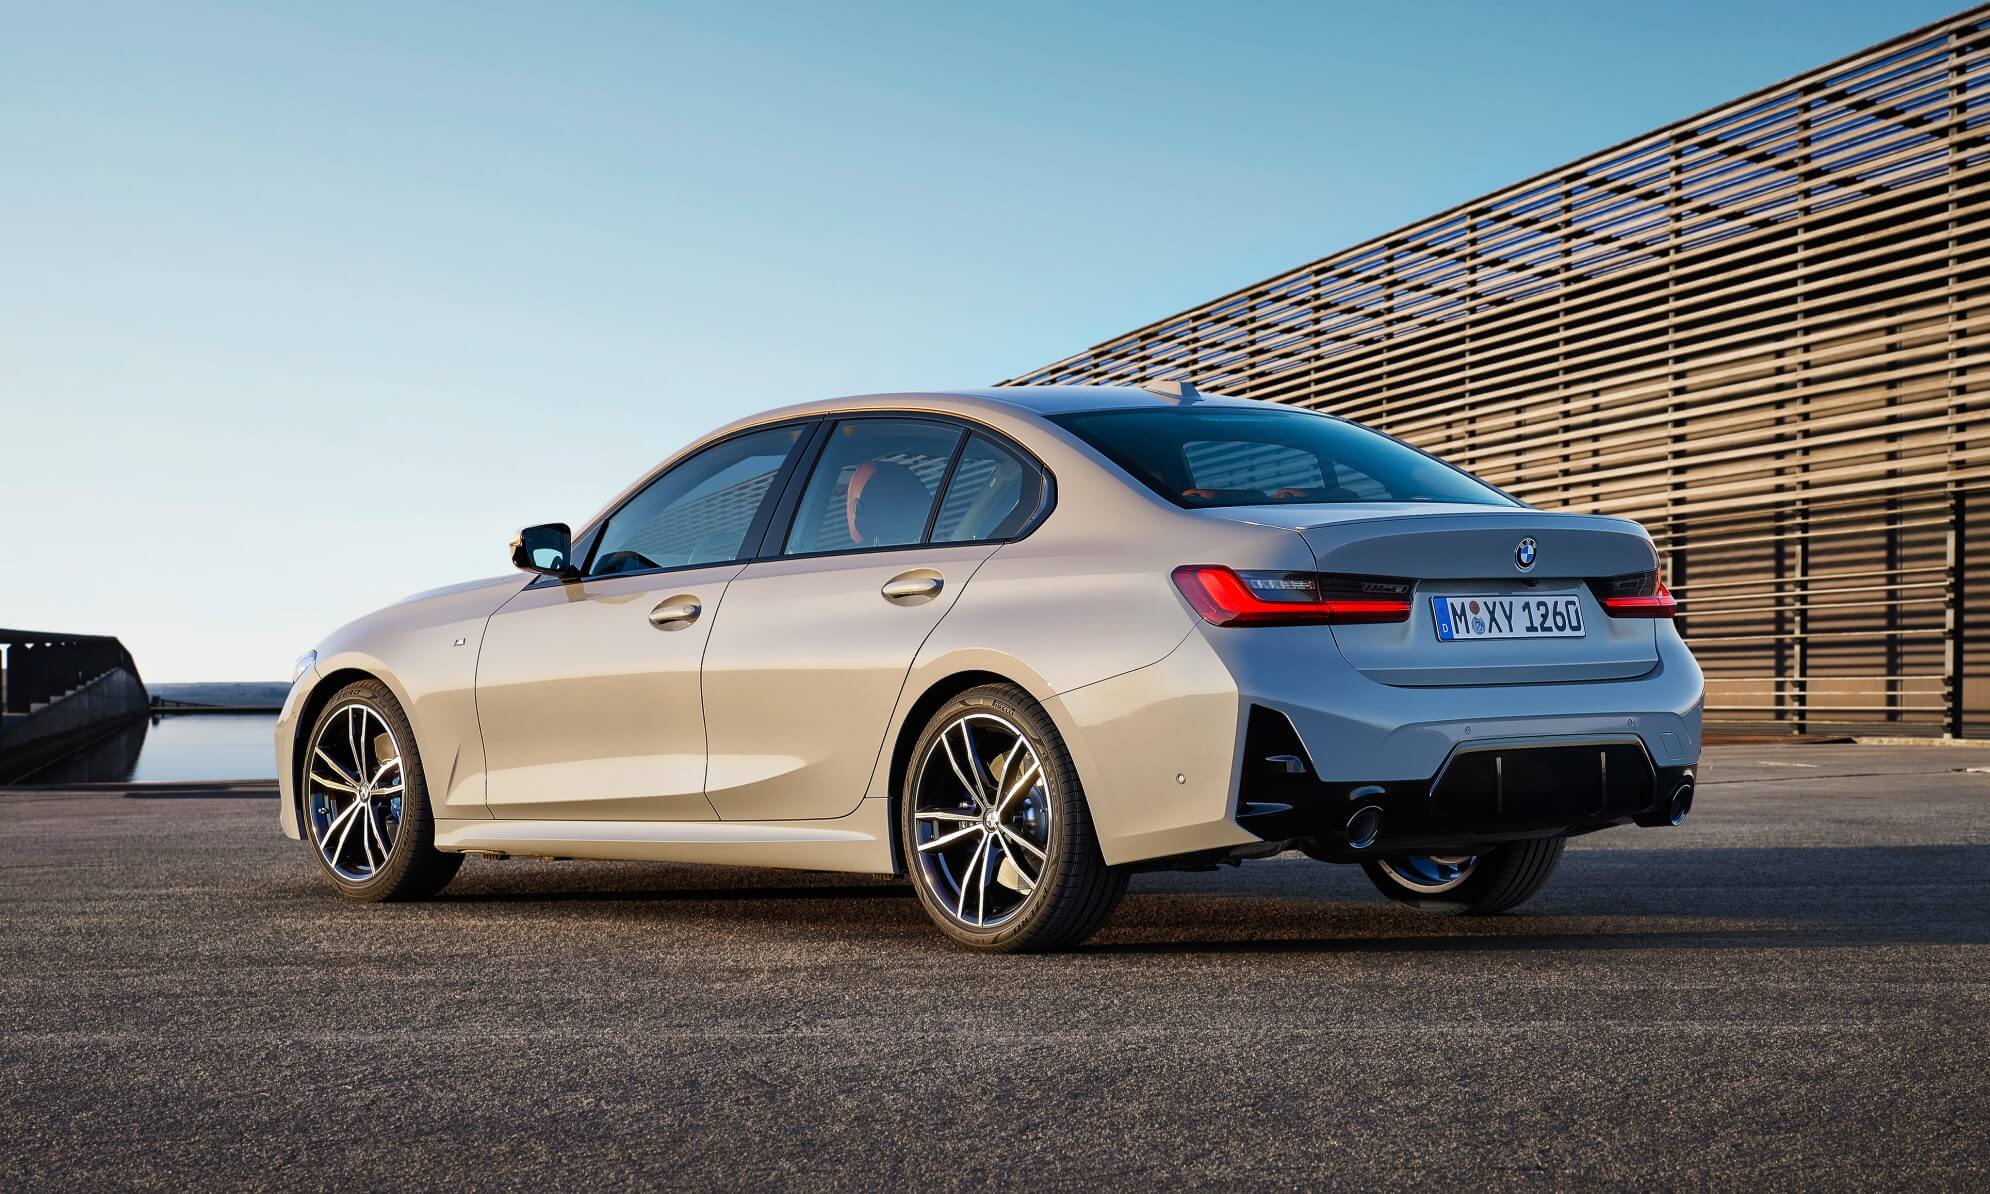 Facelifted 3 Series BMW rear